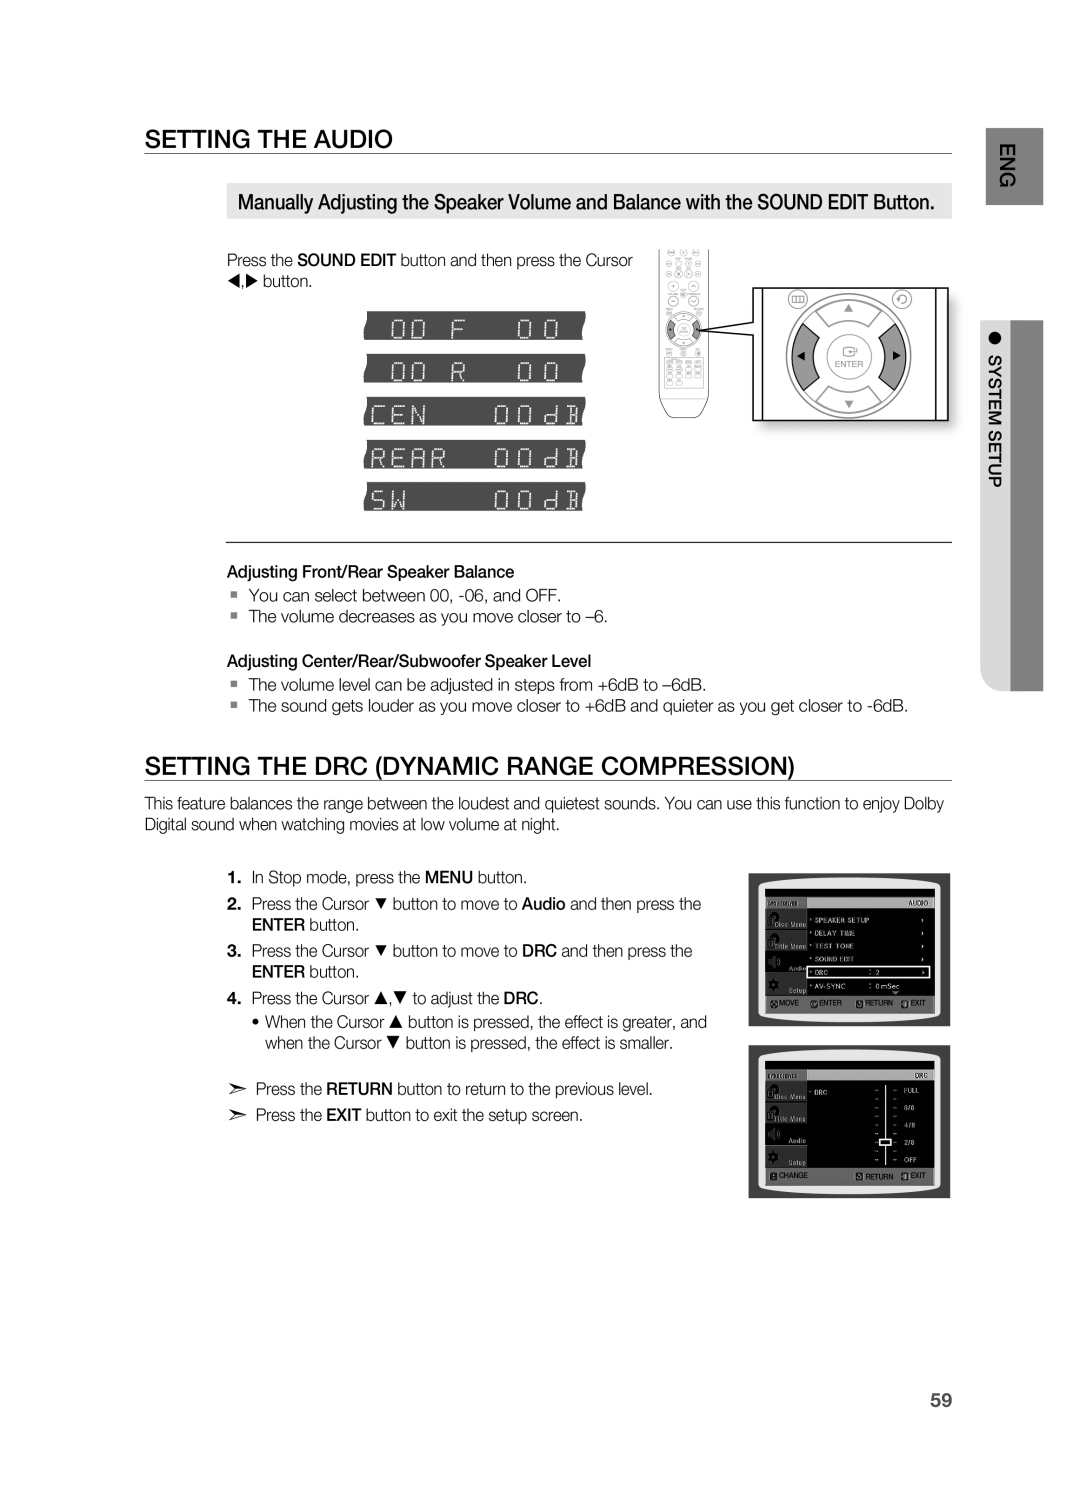 Samsung HT-Z510 manual SETTINg THE AUDIO, SETTINg THE DrC DYNAMIC rANgE COMPrESSION 